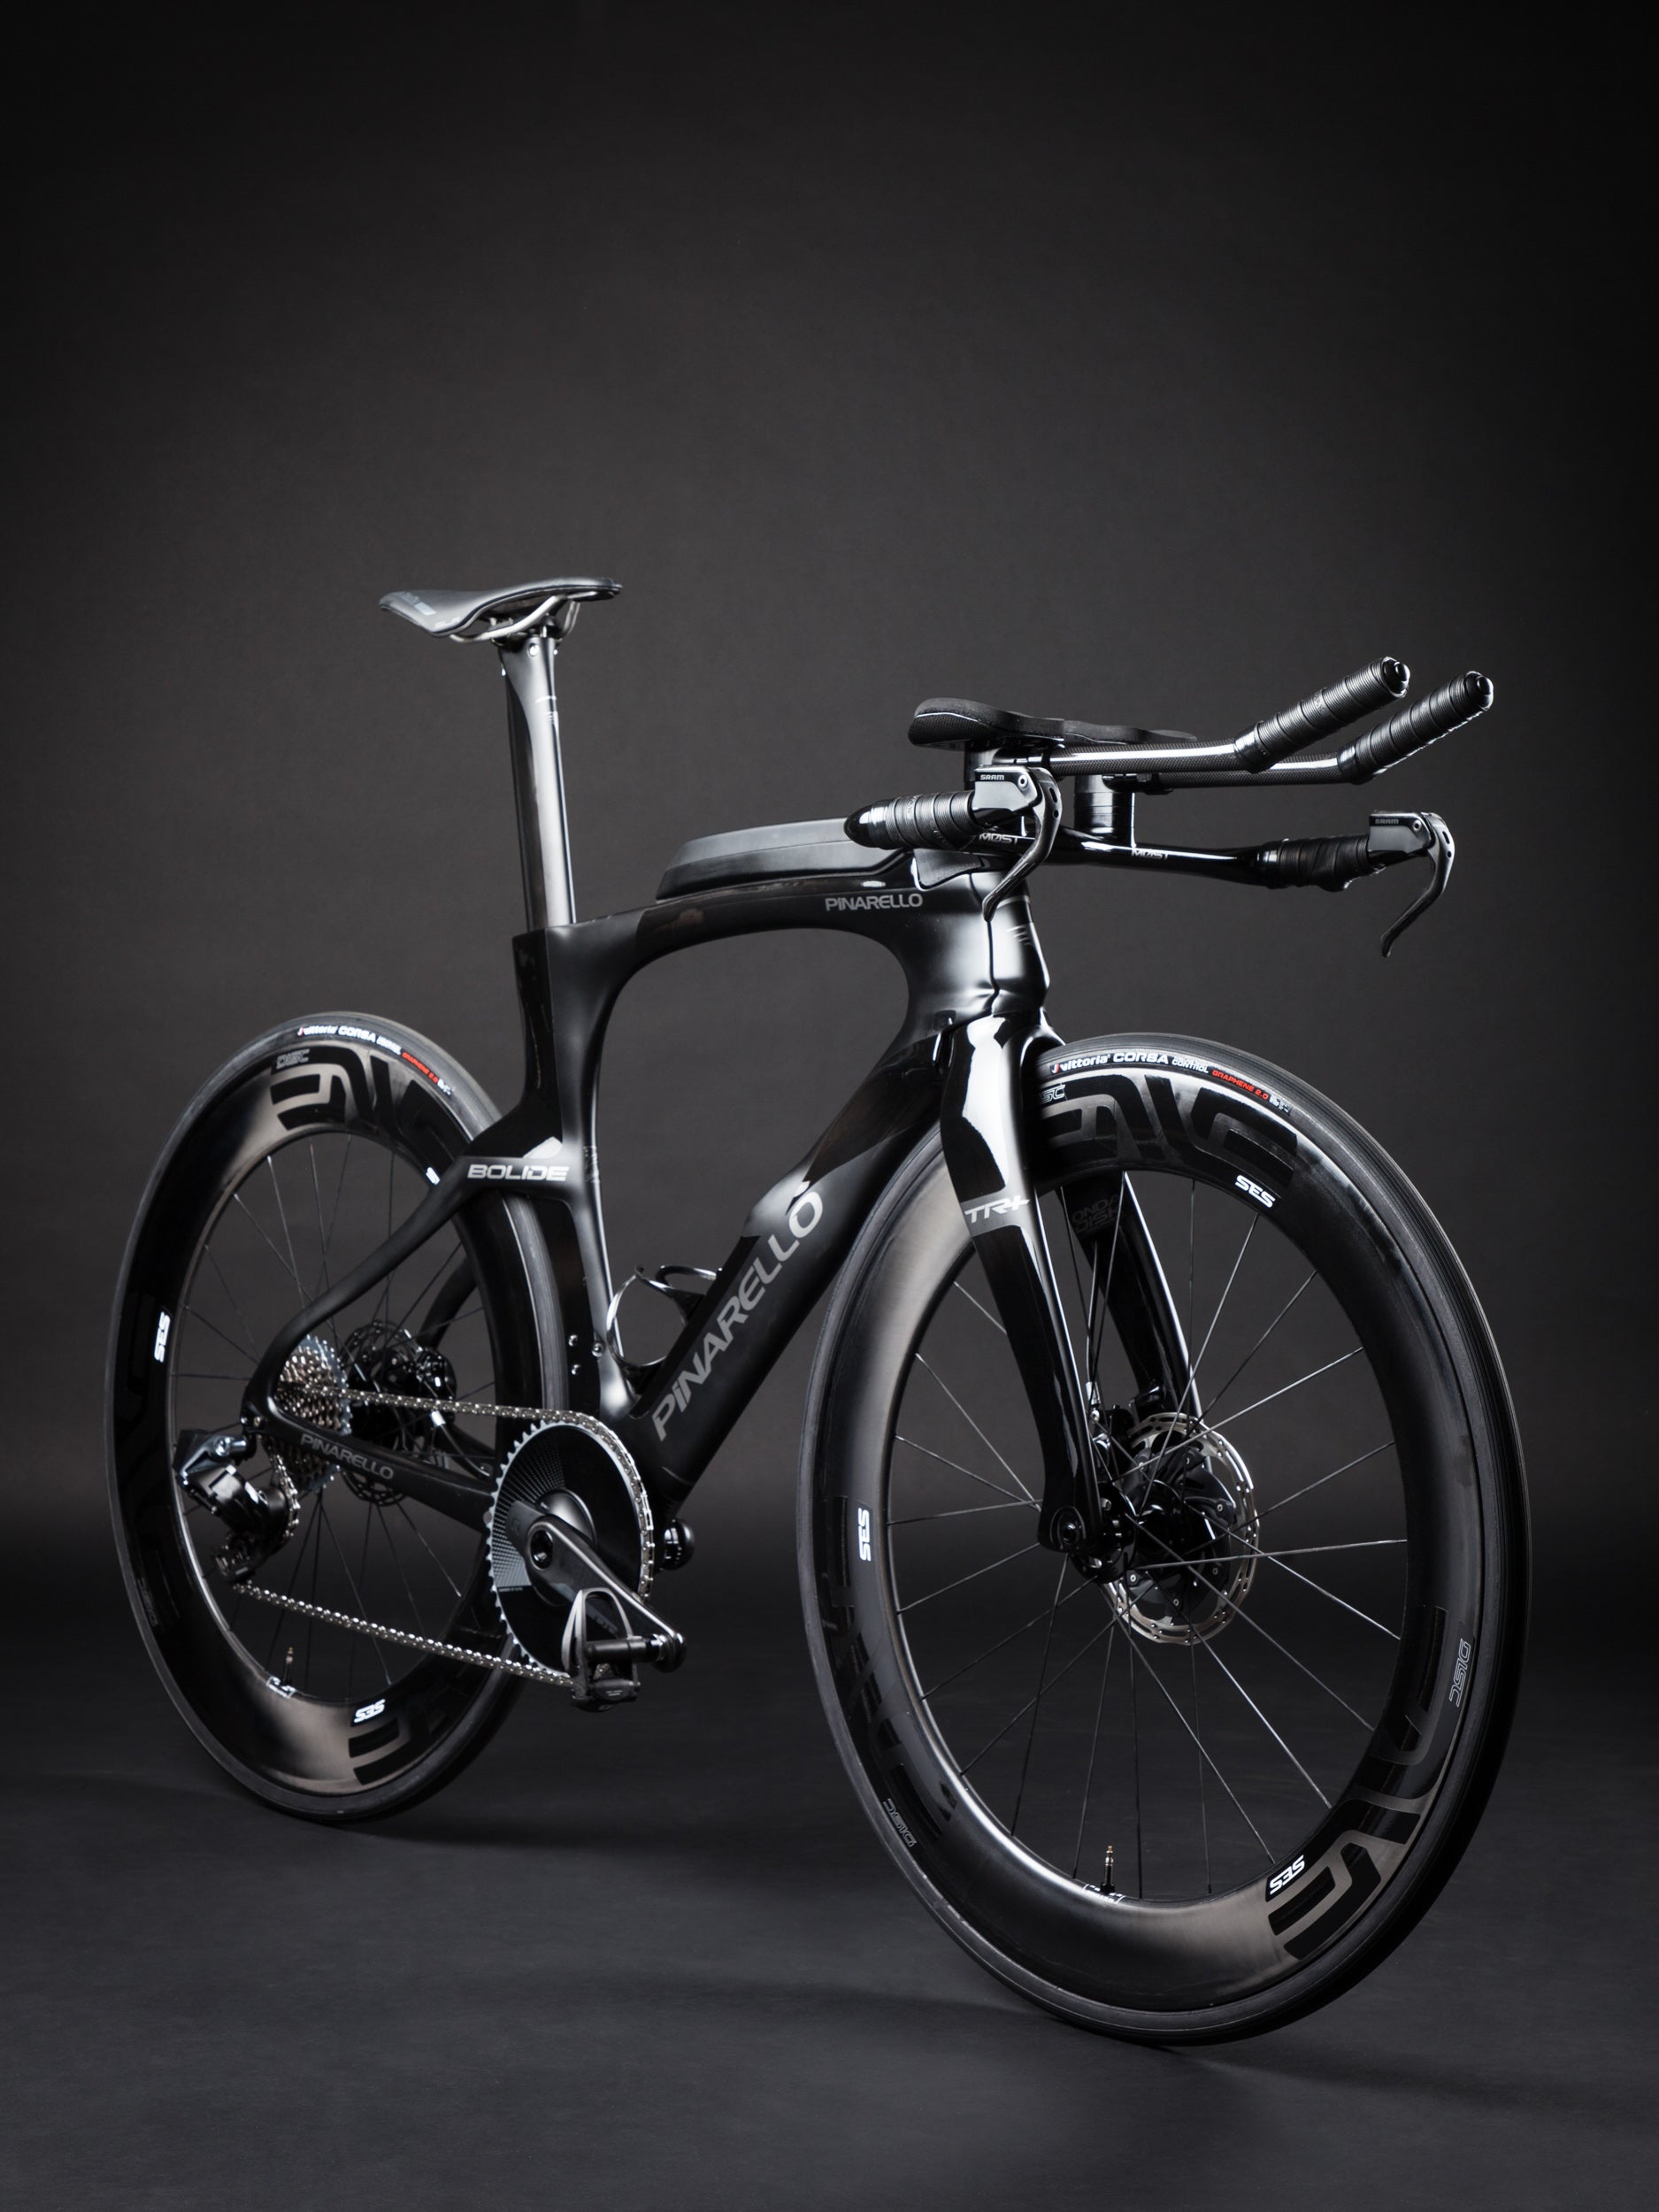 Gallery: A Blacked Out Pinarello Bolide